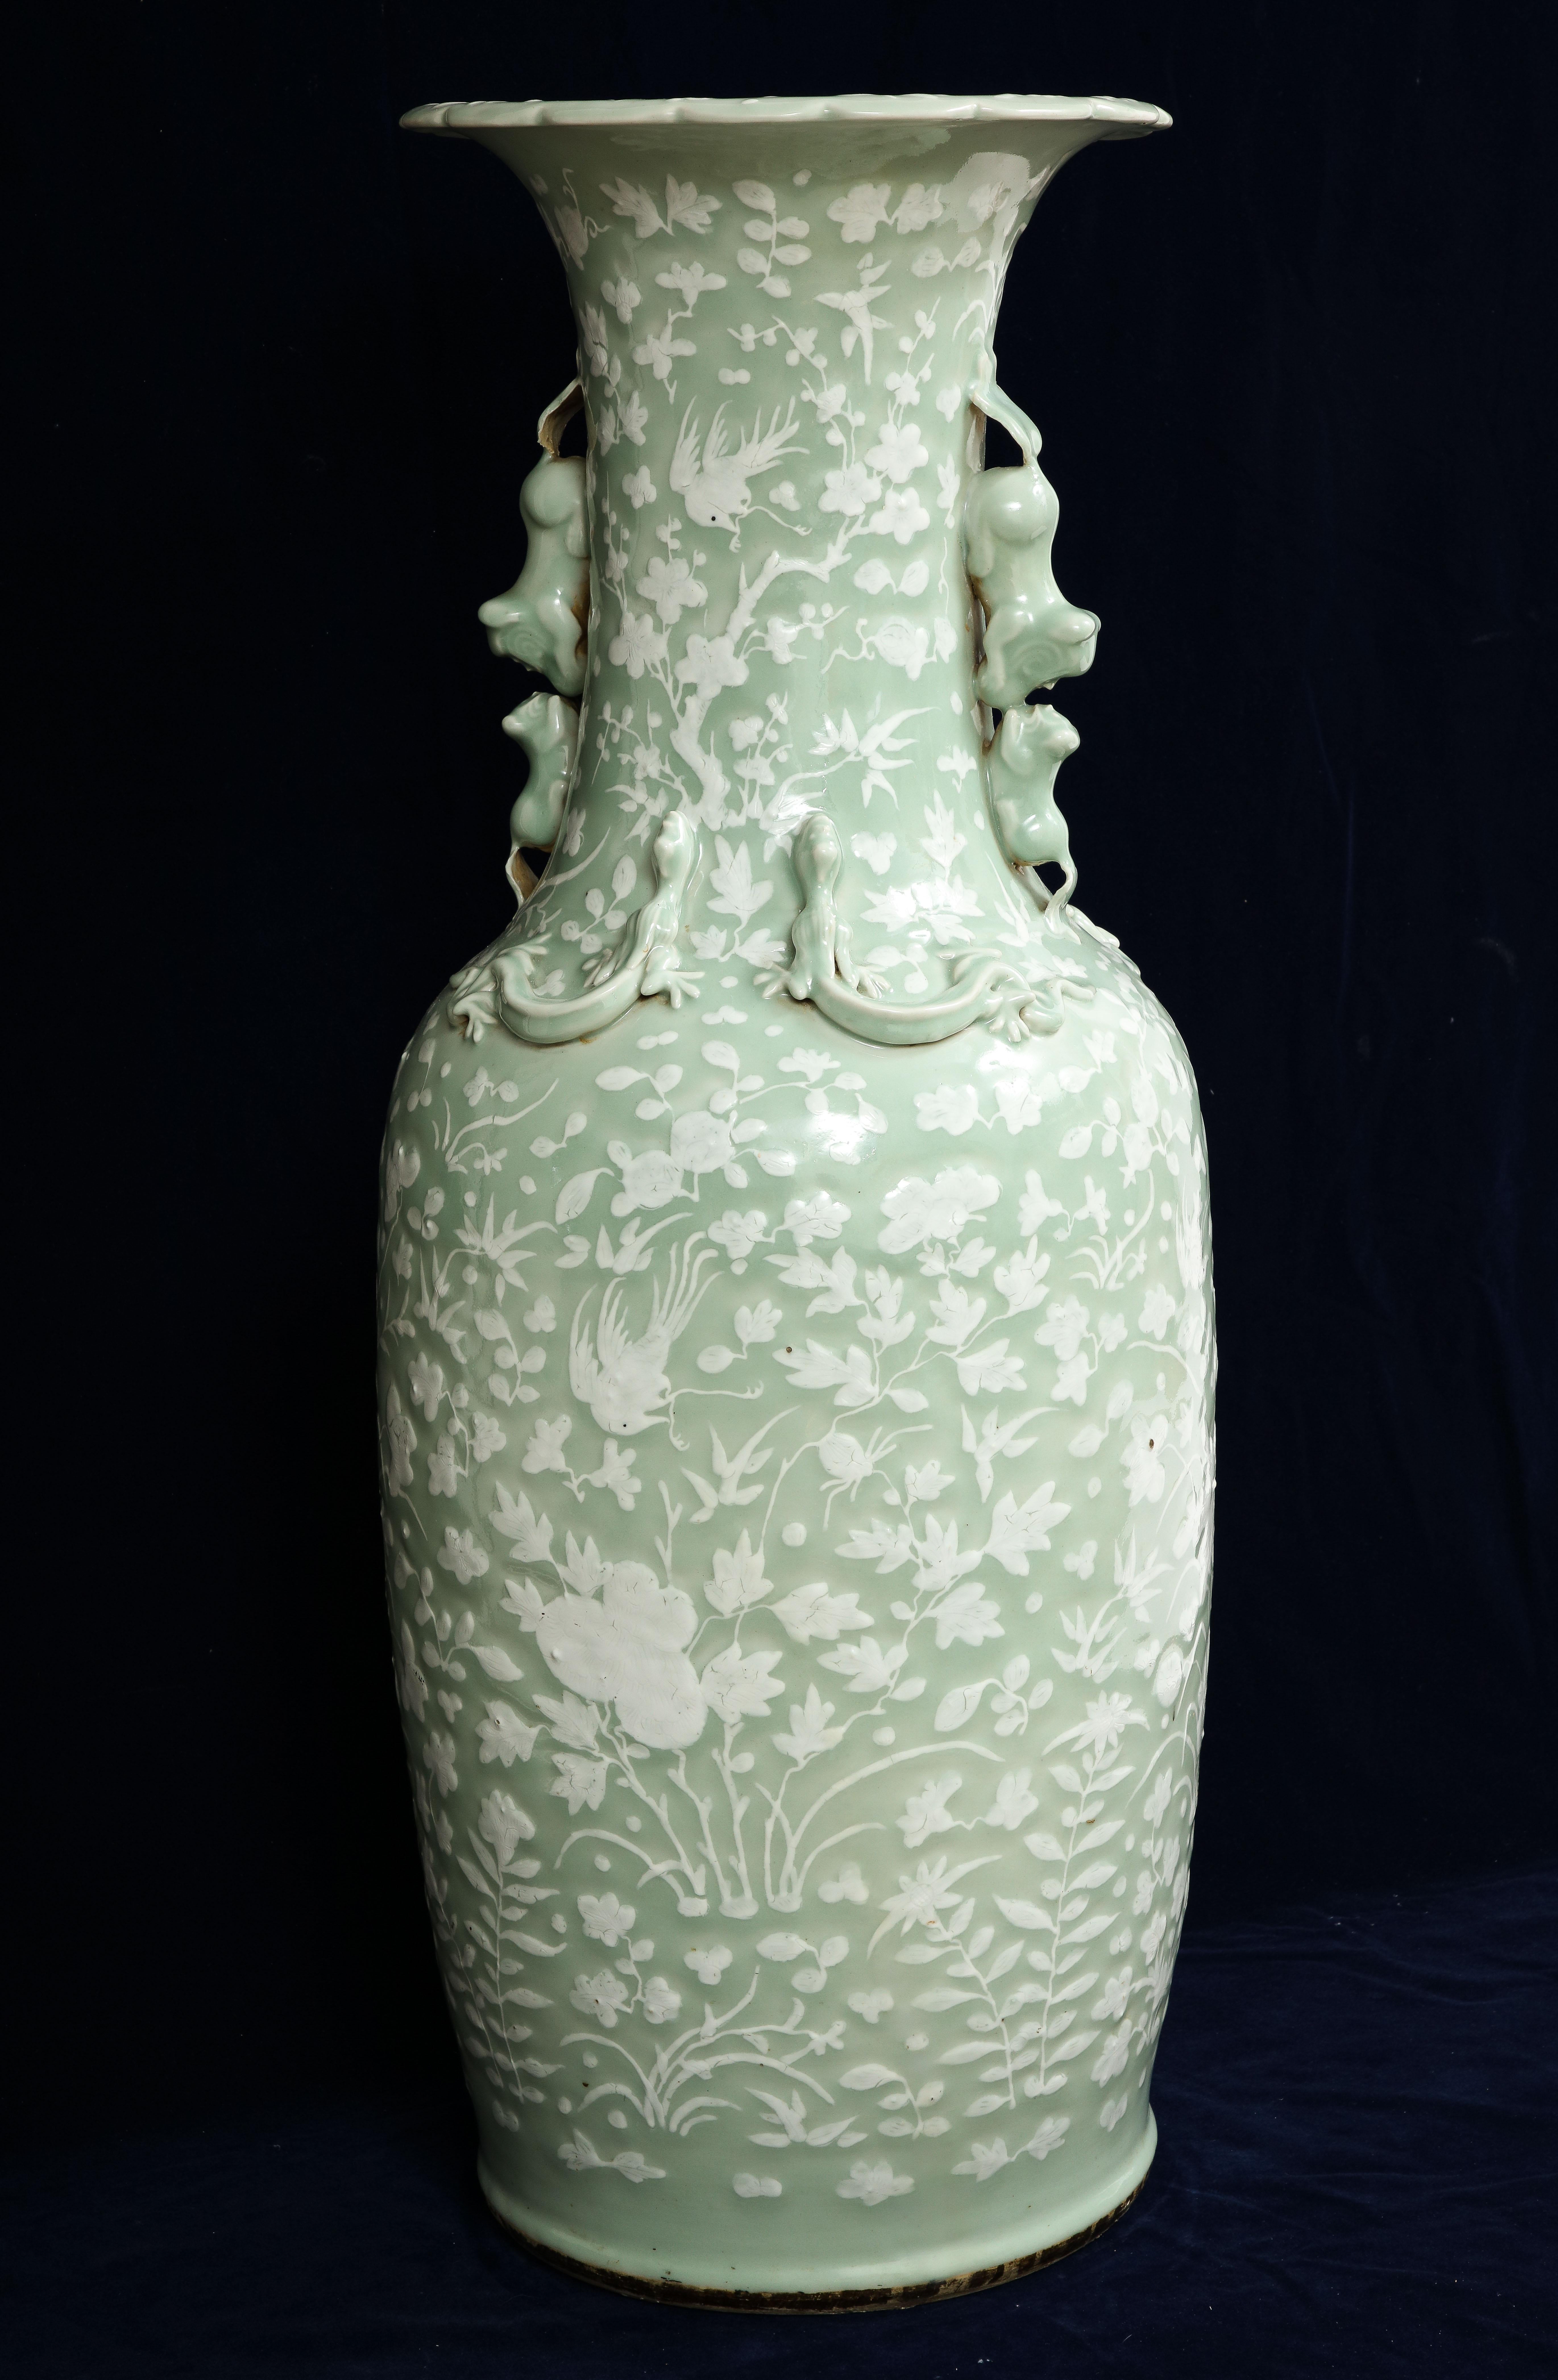 A Marvelous and Quite Large 19th Century Chinese Celadon-Ground slip-decorated vase with Foo Dog Handles. The piece is of baluster form and decorated throughout the body in white slip with incised details of butterflies, lotus blossoms, prunus and